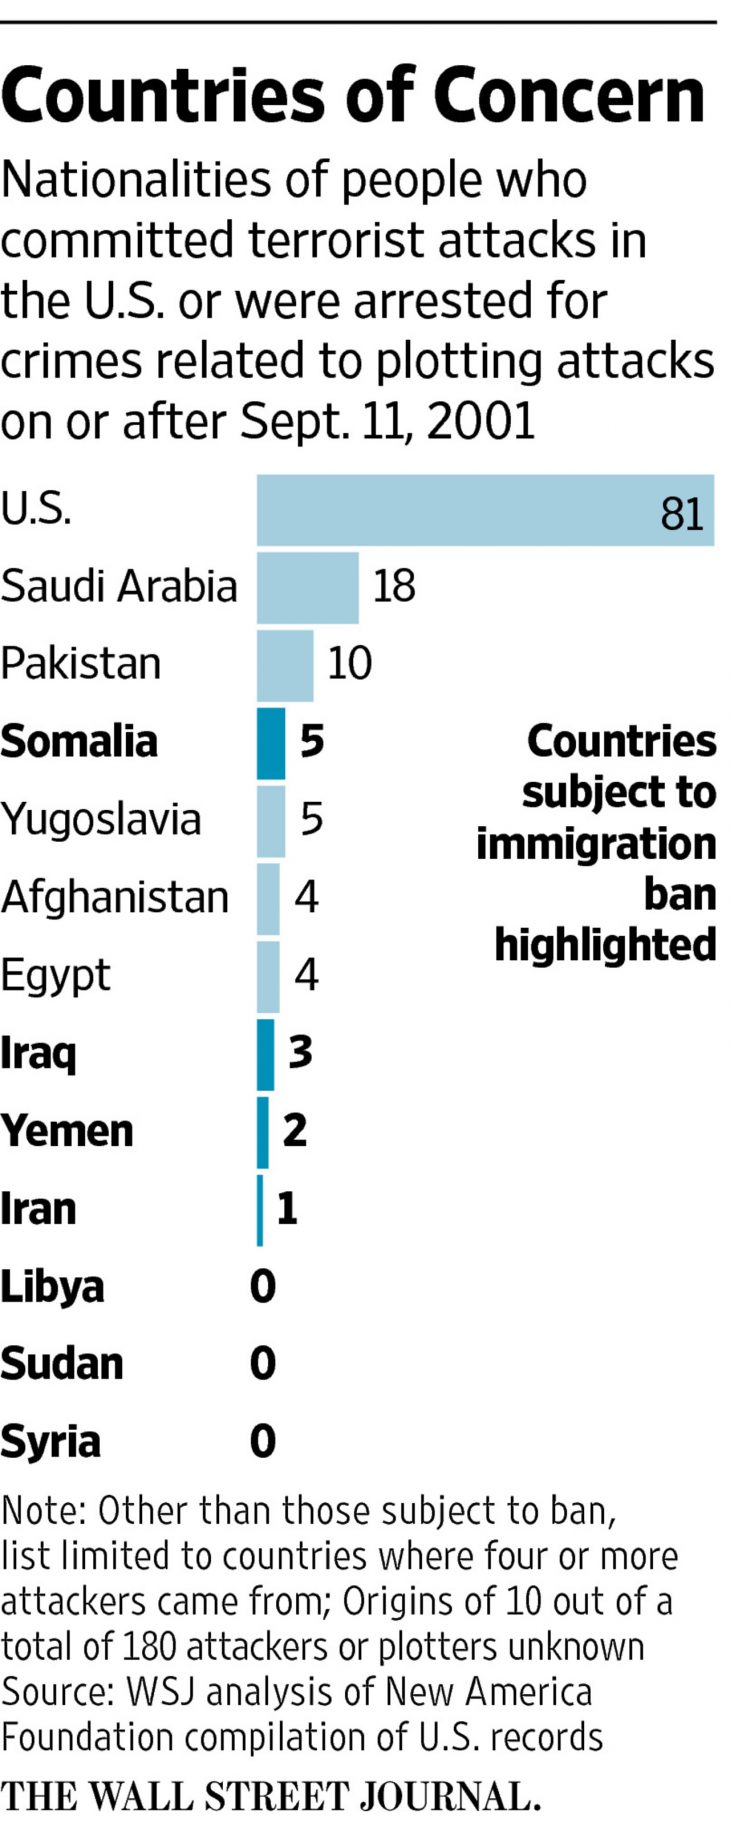 Countries Under U.S. Entry Ban Aren’t Main Sources of Terror Attacks